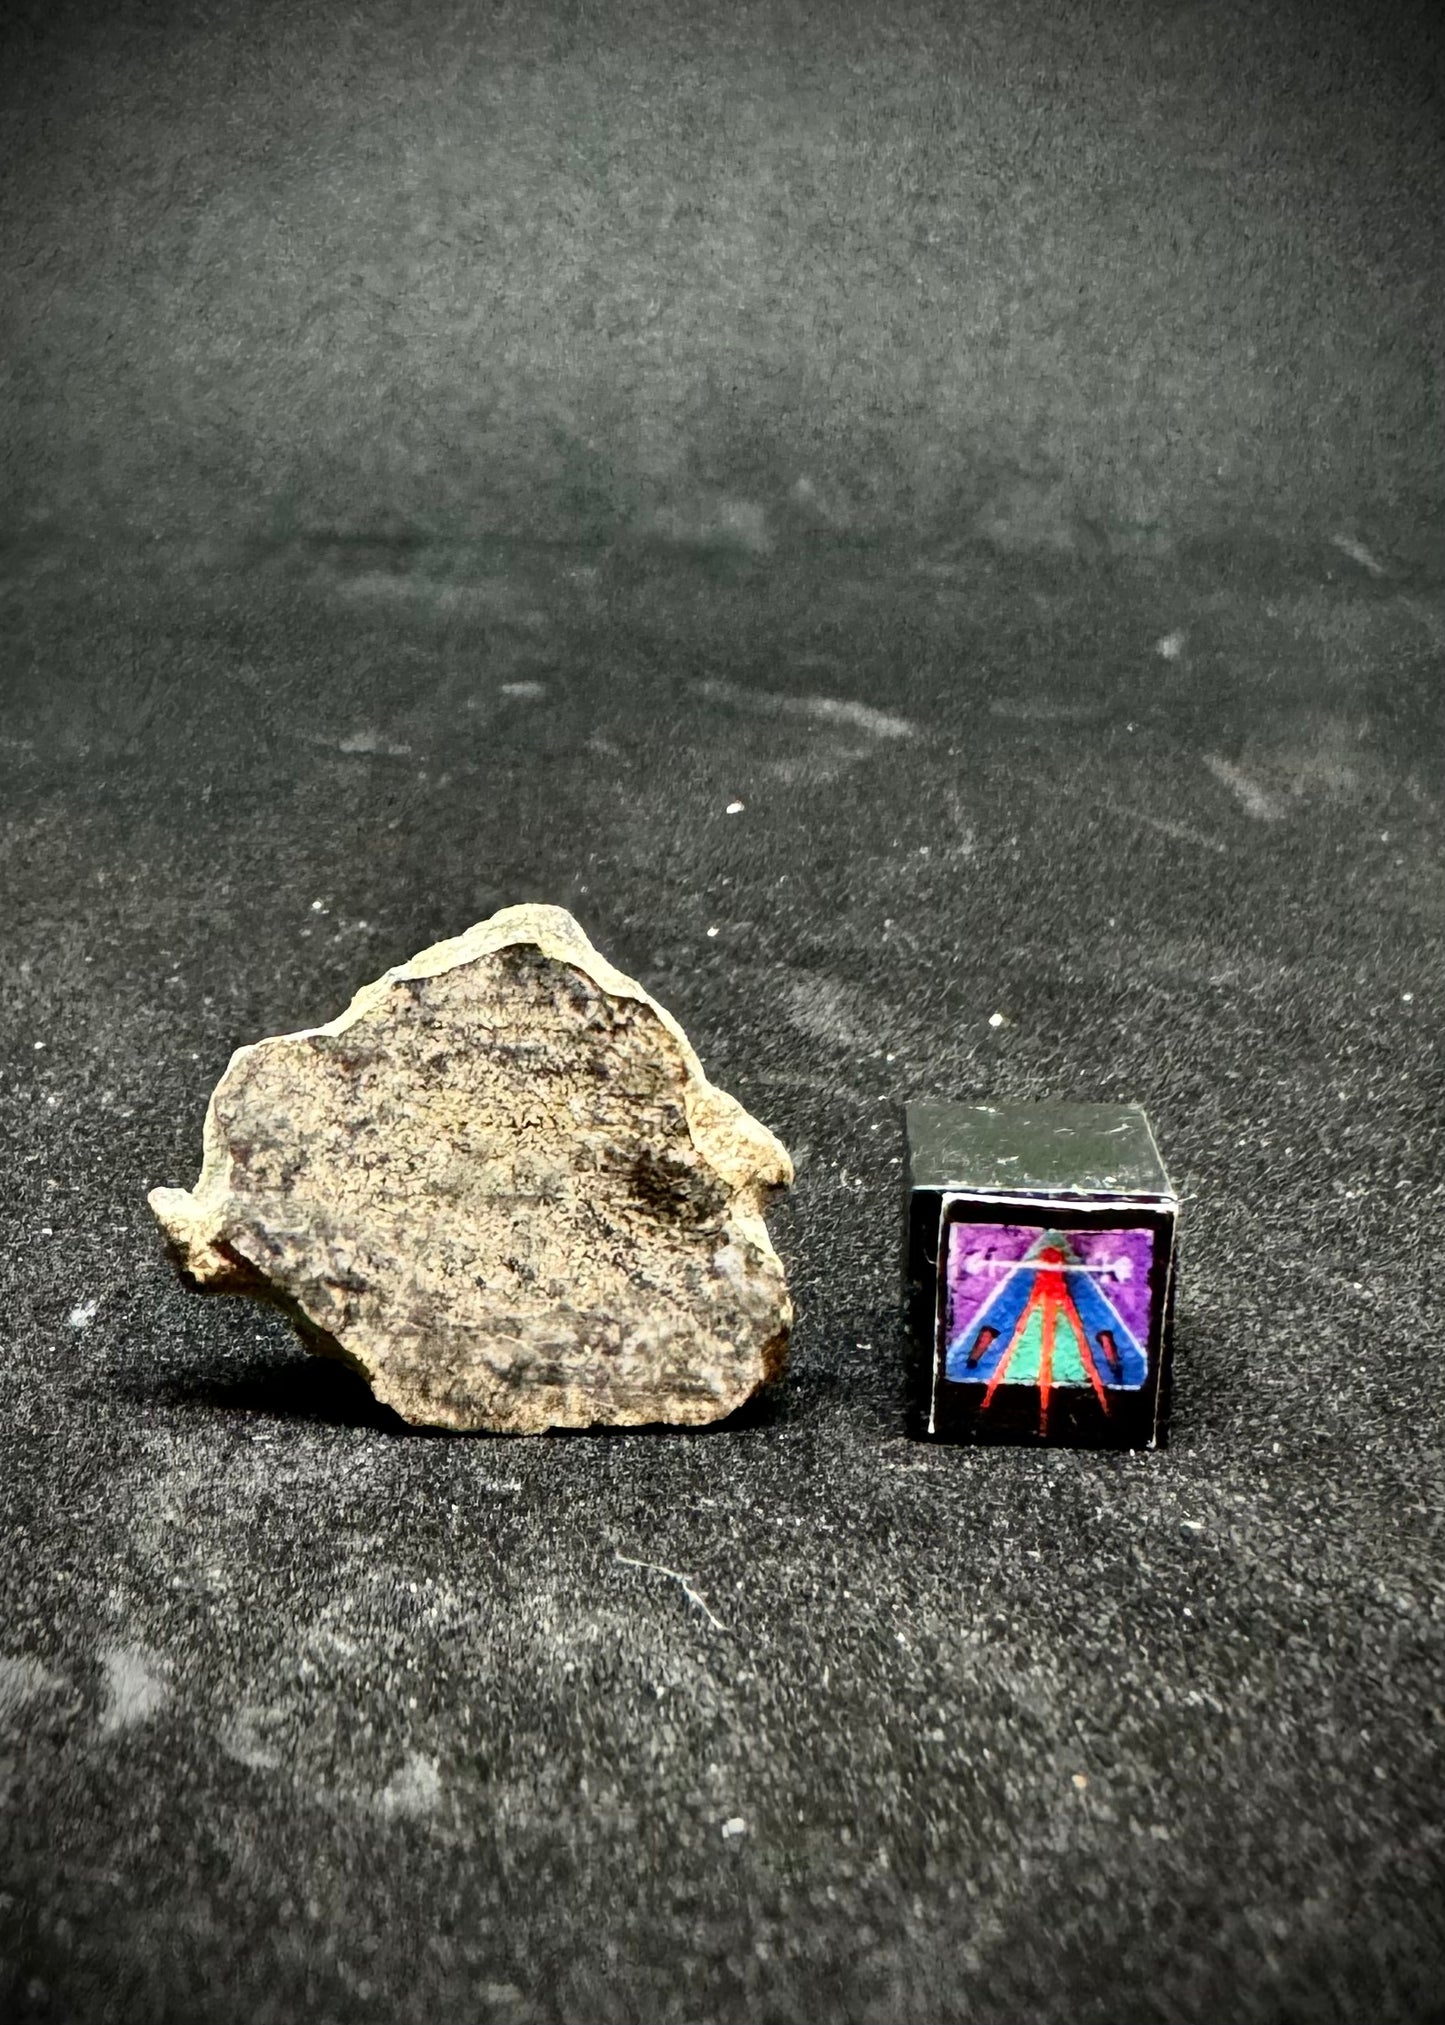 NWA 14526 Lunar Mare Basalt - An Ultra Rare Meteorite From Deep Within Our Moon! 1.7g